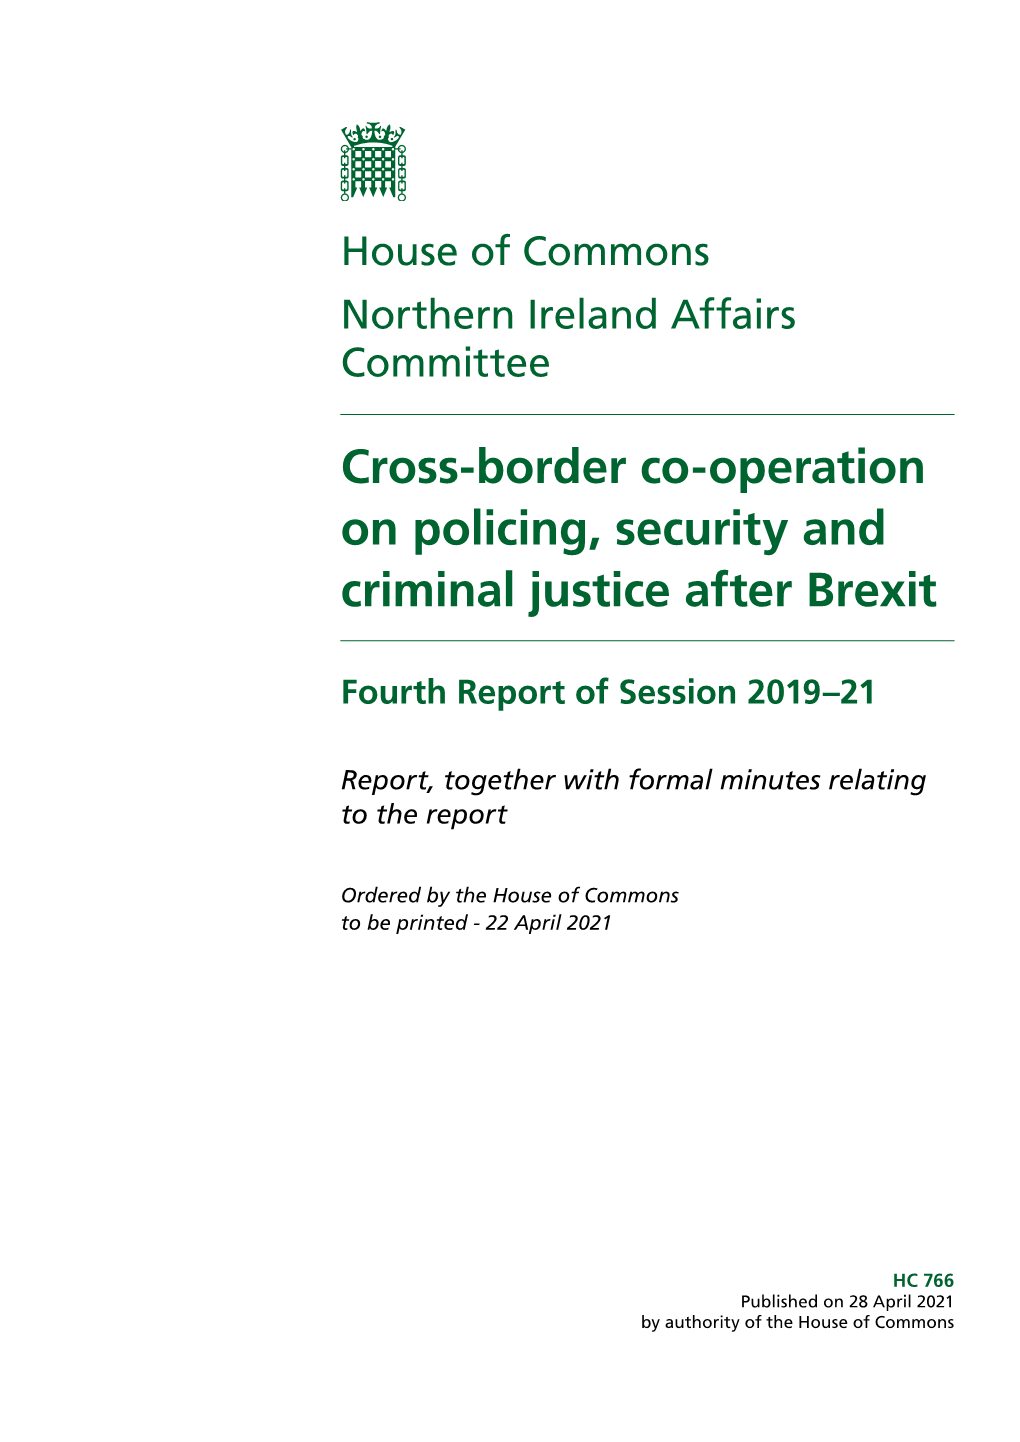 Cross-Border Co-Operation on Policing, Security and Criminal Justice After Brexit